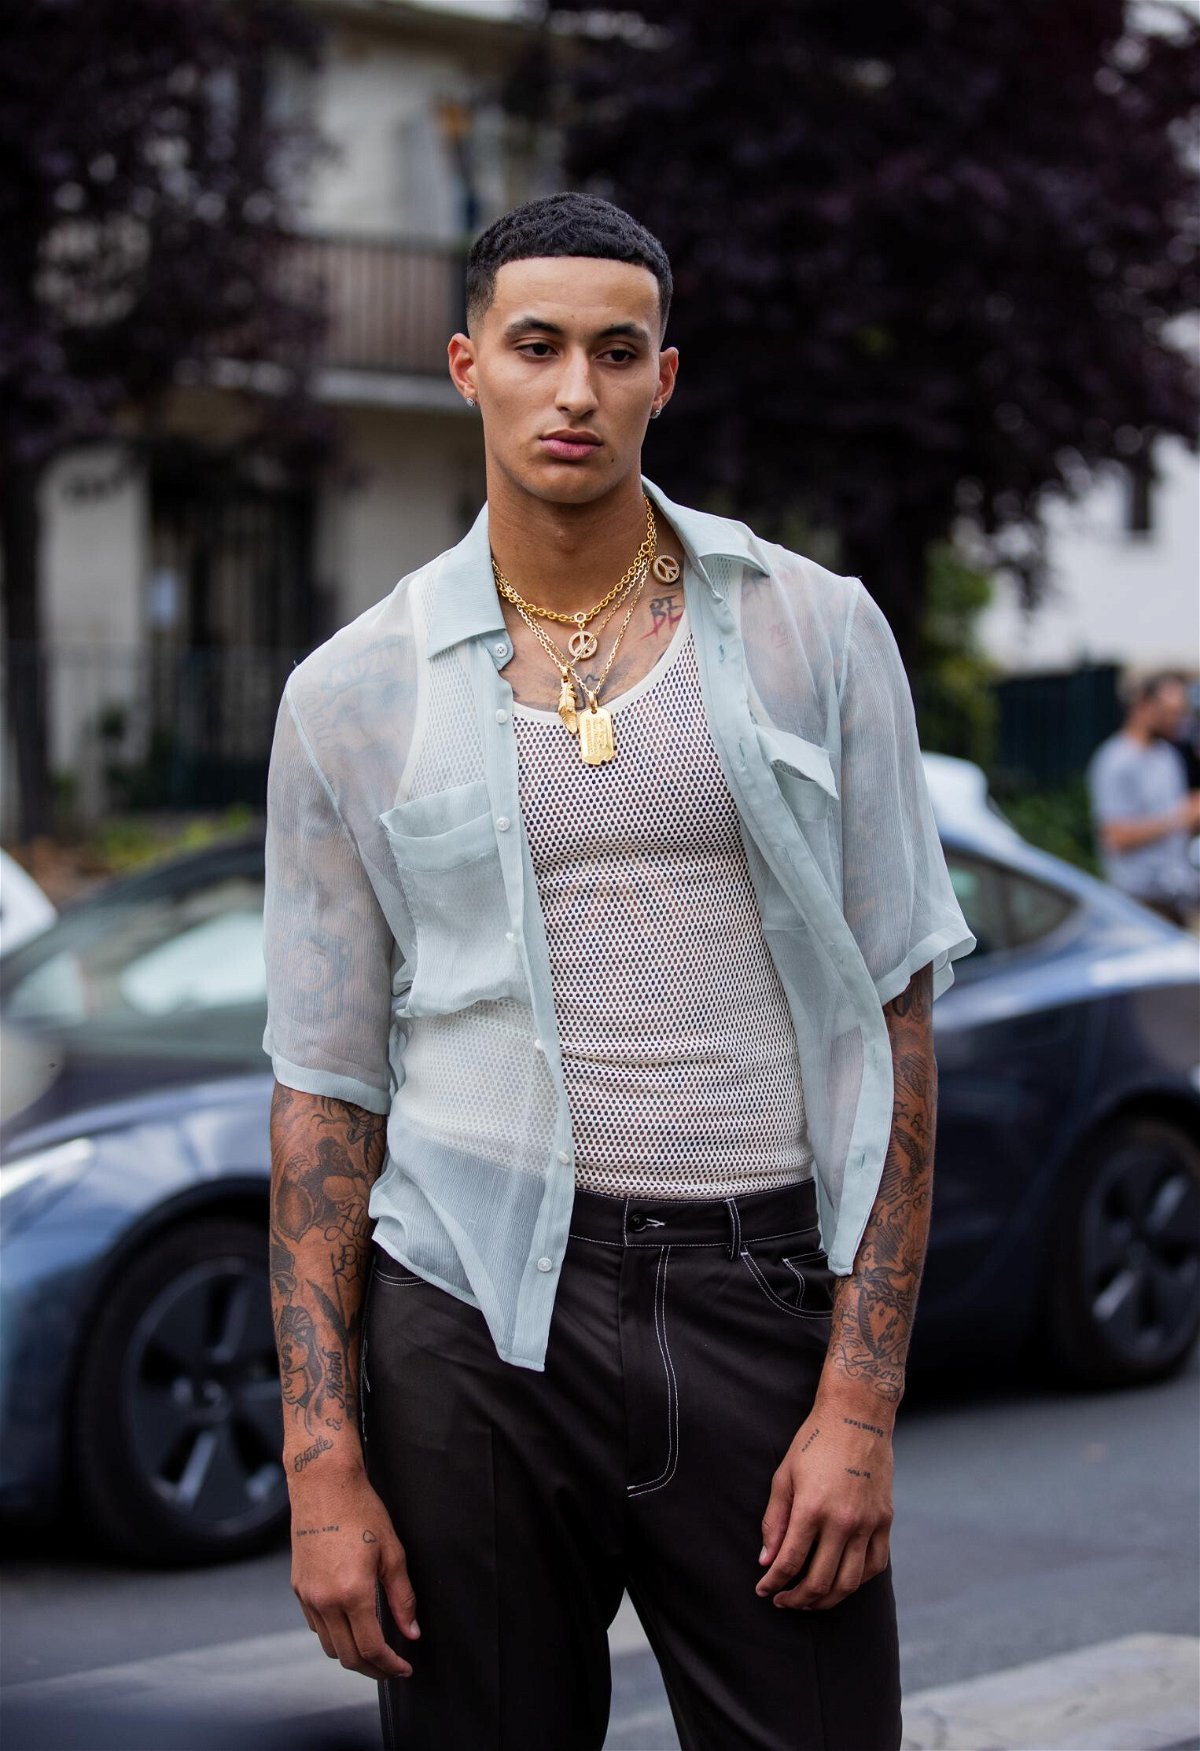 Clear the runway… Kyle Kuzma has arrived in style from Day 1